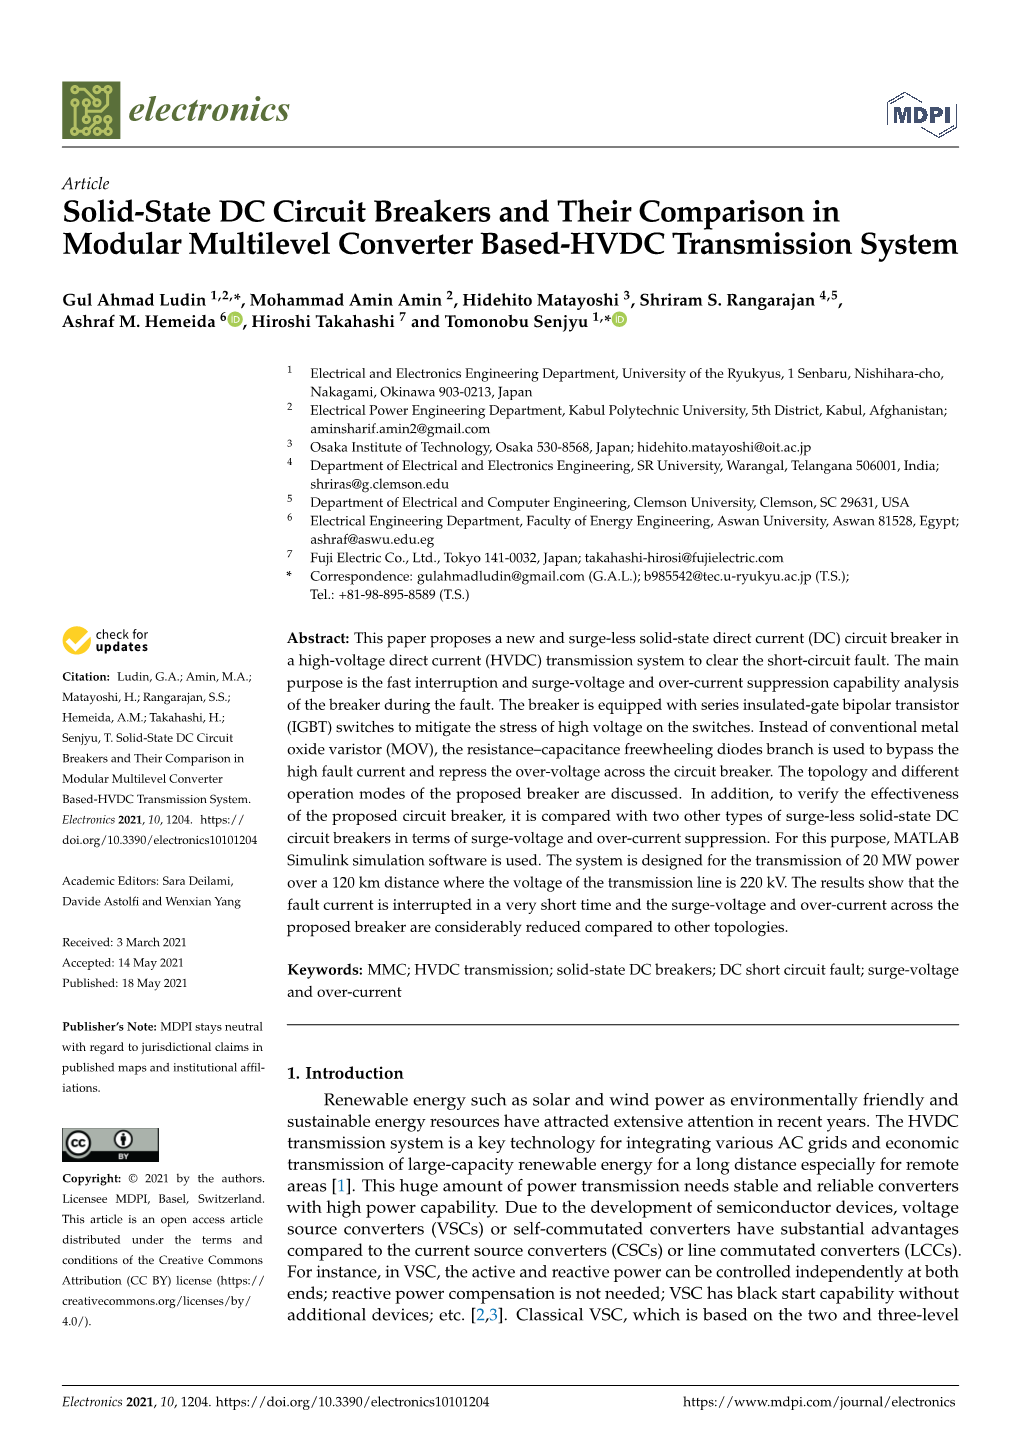 Solid-State DC Circuit Breakers and Their Comparison in Modular Multilevel Converter Based-HVDC Transmission System